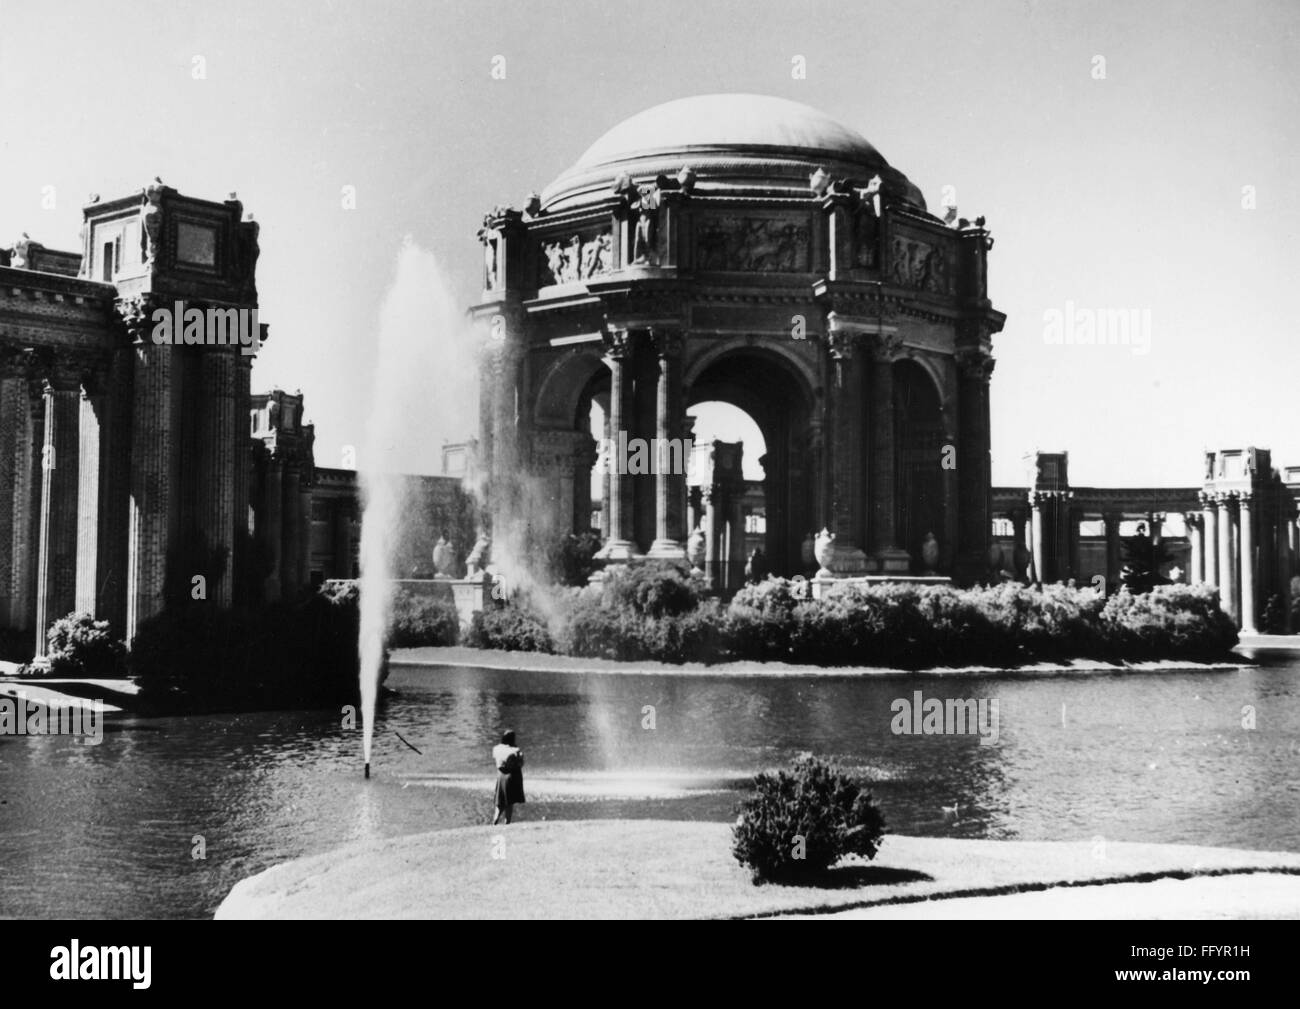 PANAMA-PACIFIC EXPOSITION. /nThe Palace of Fine Arts at the Panama-Pacific Exposition in San Francisco, California. Photograph, 1915. Stock Photo